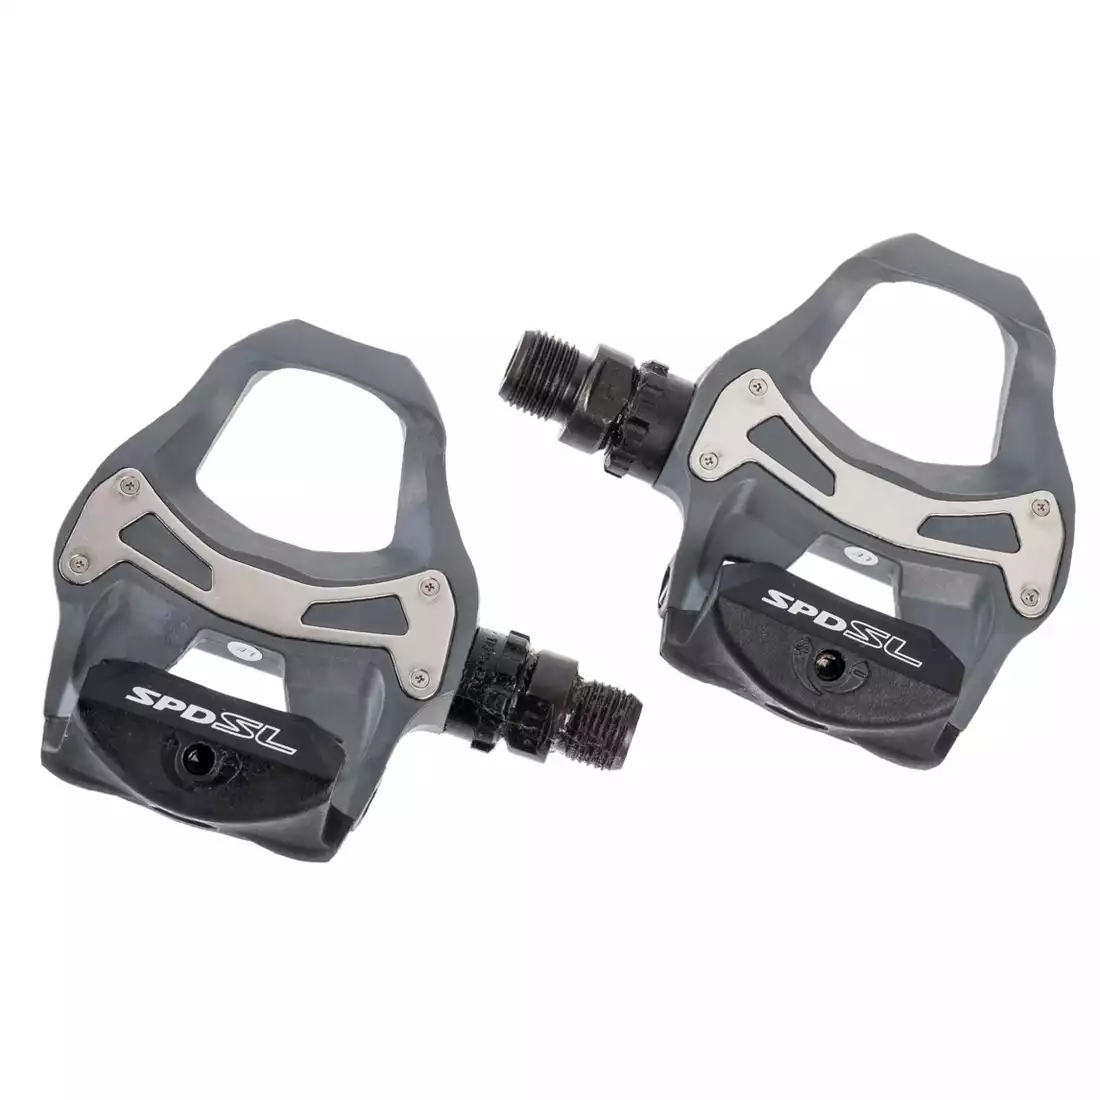 lærken galop Duplikere SHIMANORoad bicycle pedals with cleats SPD- SL R550 | MikeSPORT